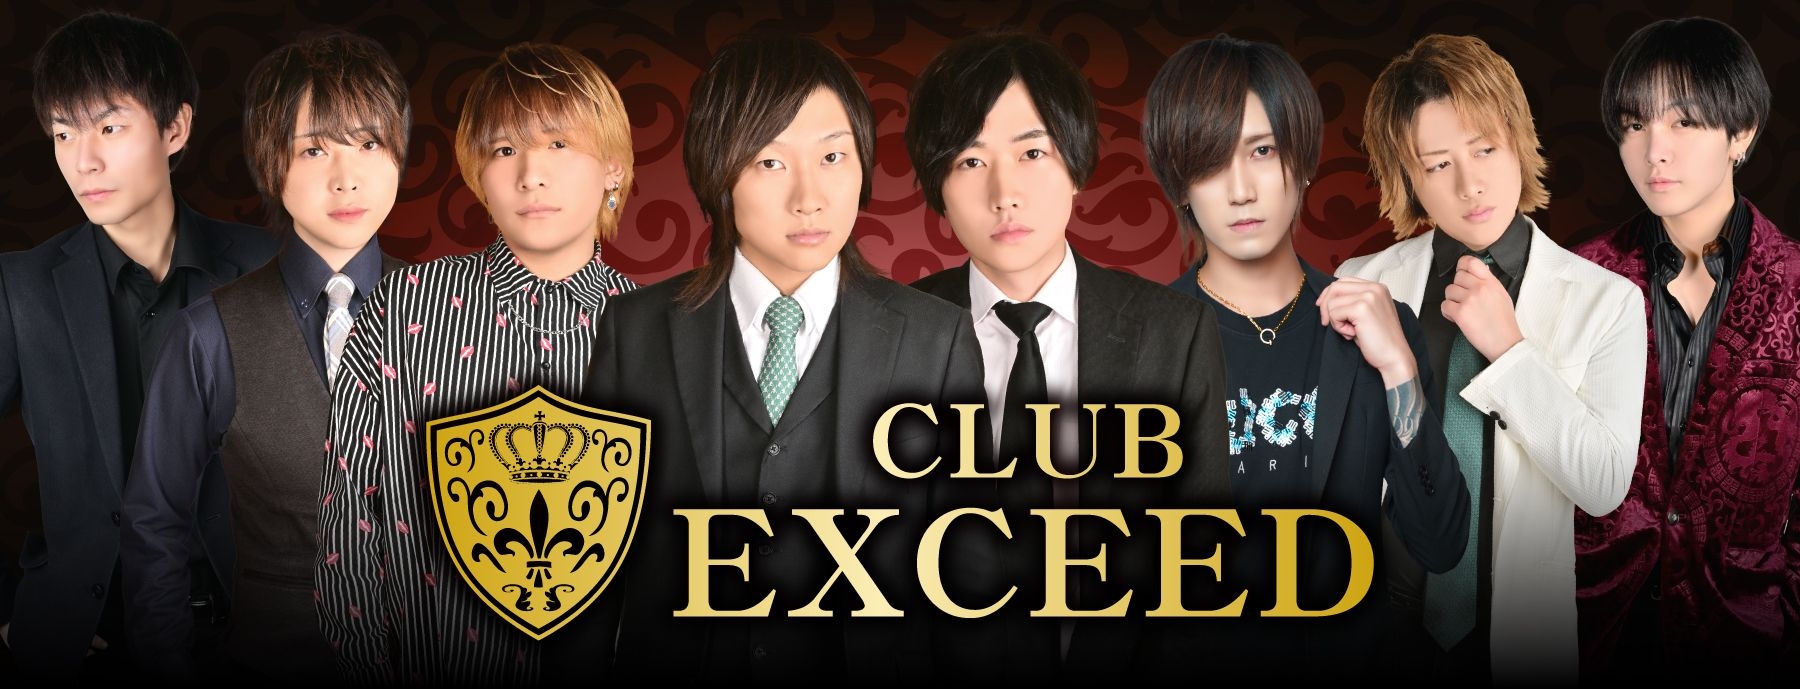 CLUB EXCEED～エクシード～